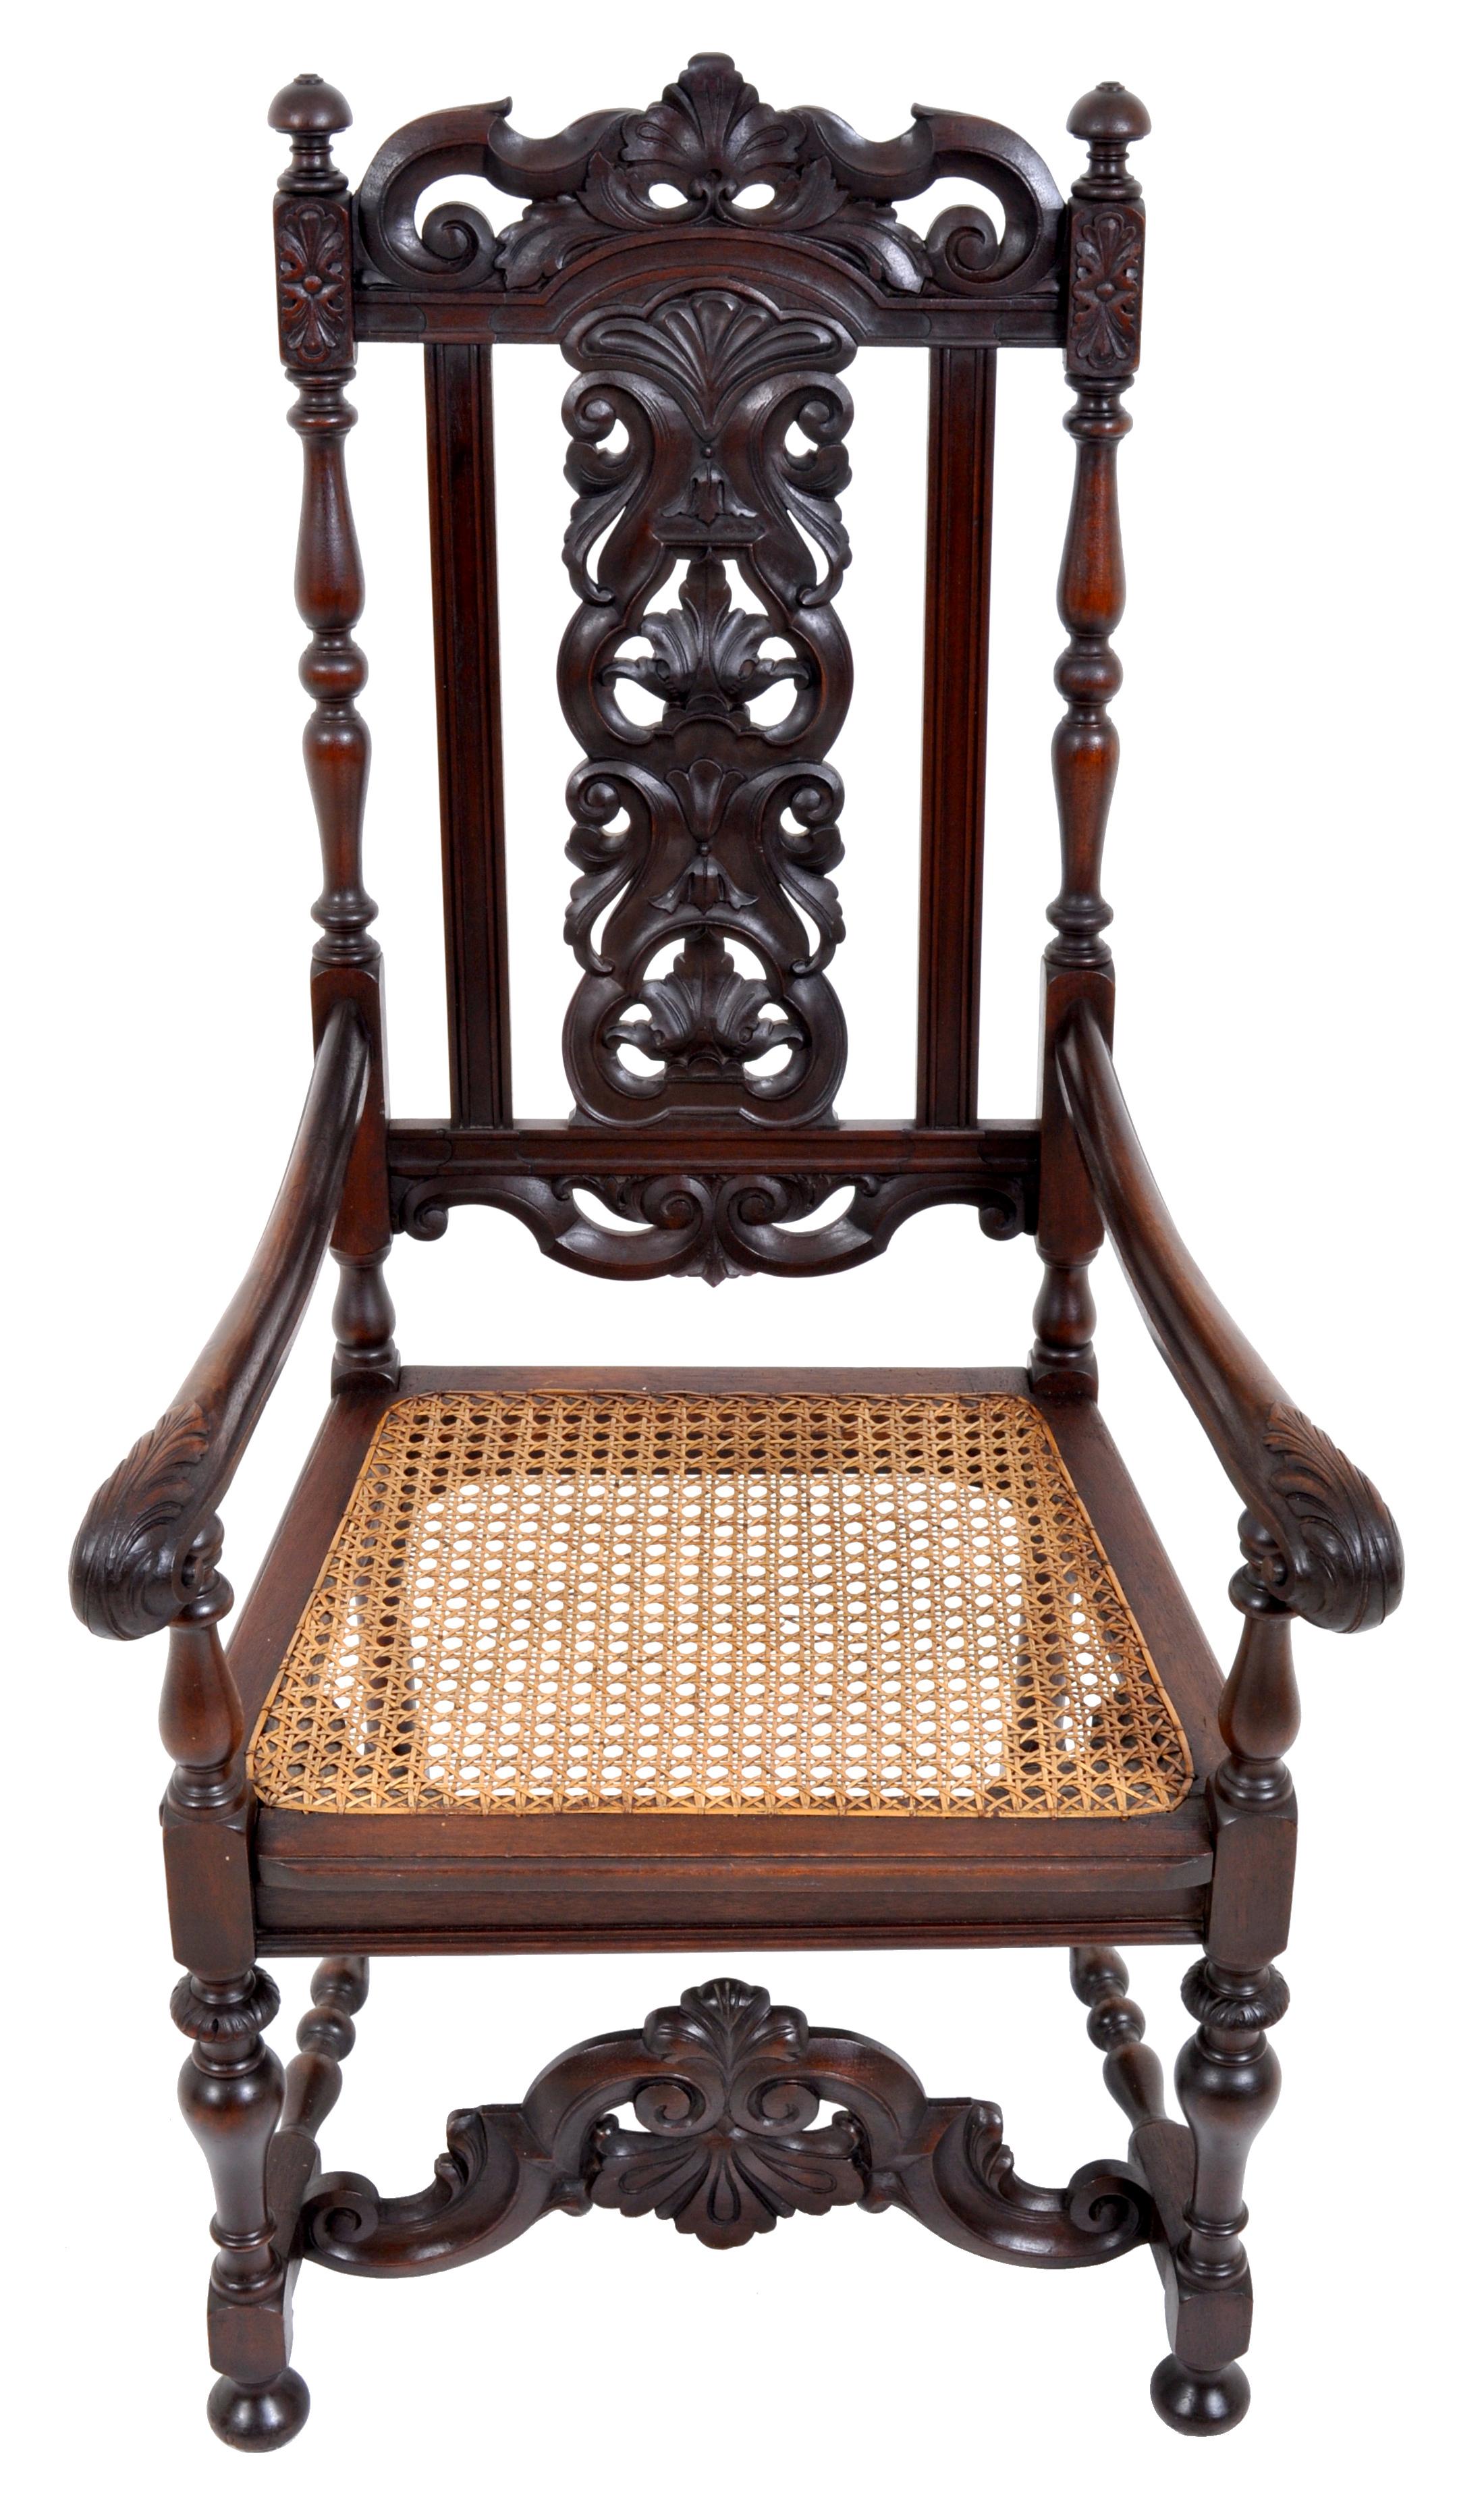 Baroque Revival Antique Baroque Carved Walnut Throne Chair, circa 1880 For Sale